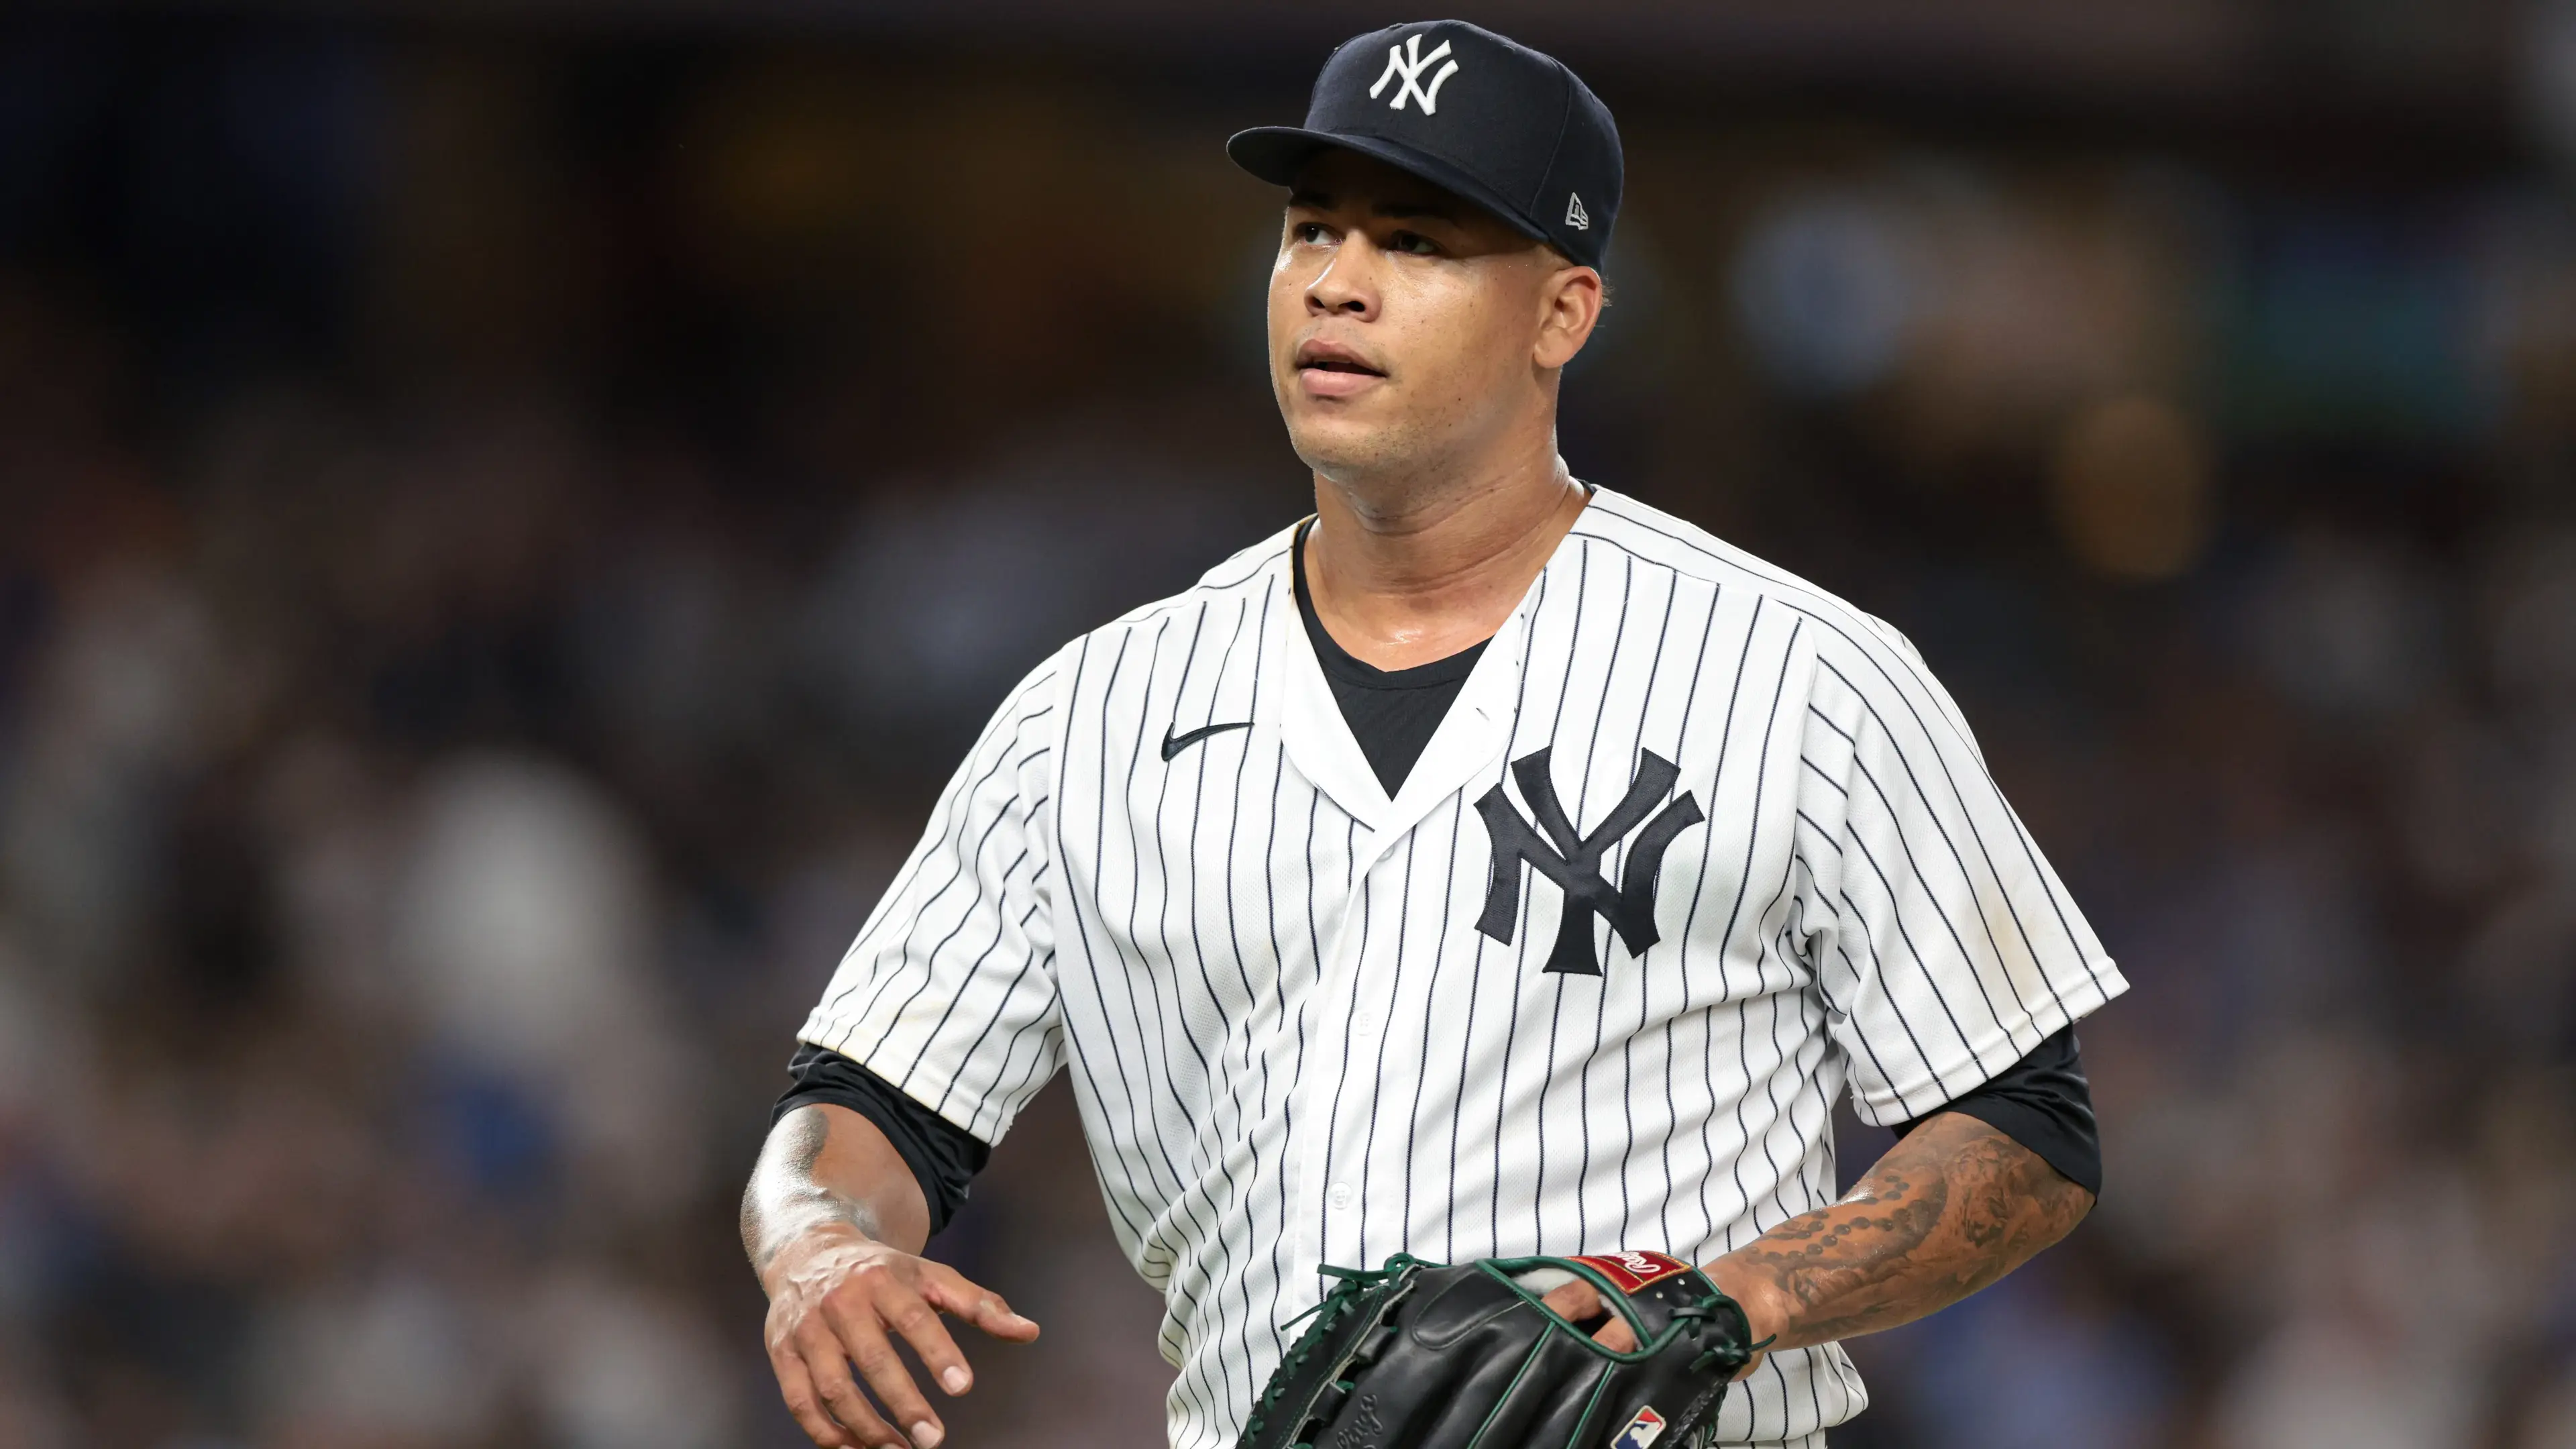 Aug 23, 2022; Bronx, New York, USA; New York Yankees starting pitcher Frankie Montas (47) walks off the field after being relieved during the sixth inning against the New York Mets at Yankee Stadium. Mandatory Credit: Vincent Carchietta-USA TODAY Sports / © Vincent Carchietta-USA TODAY Sports